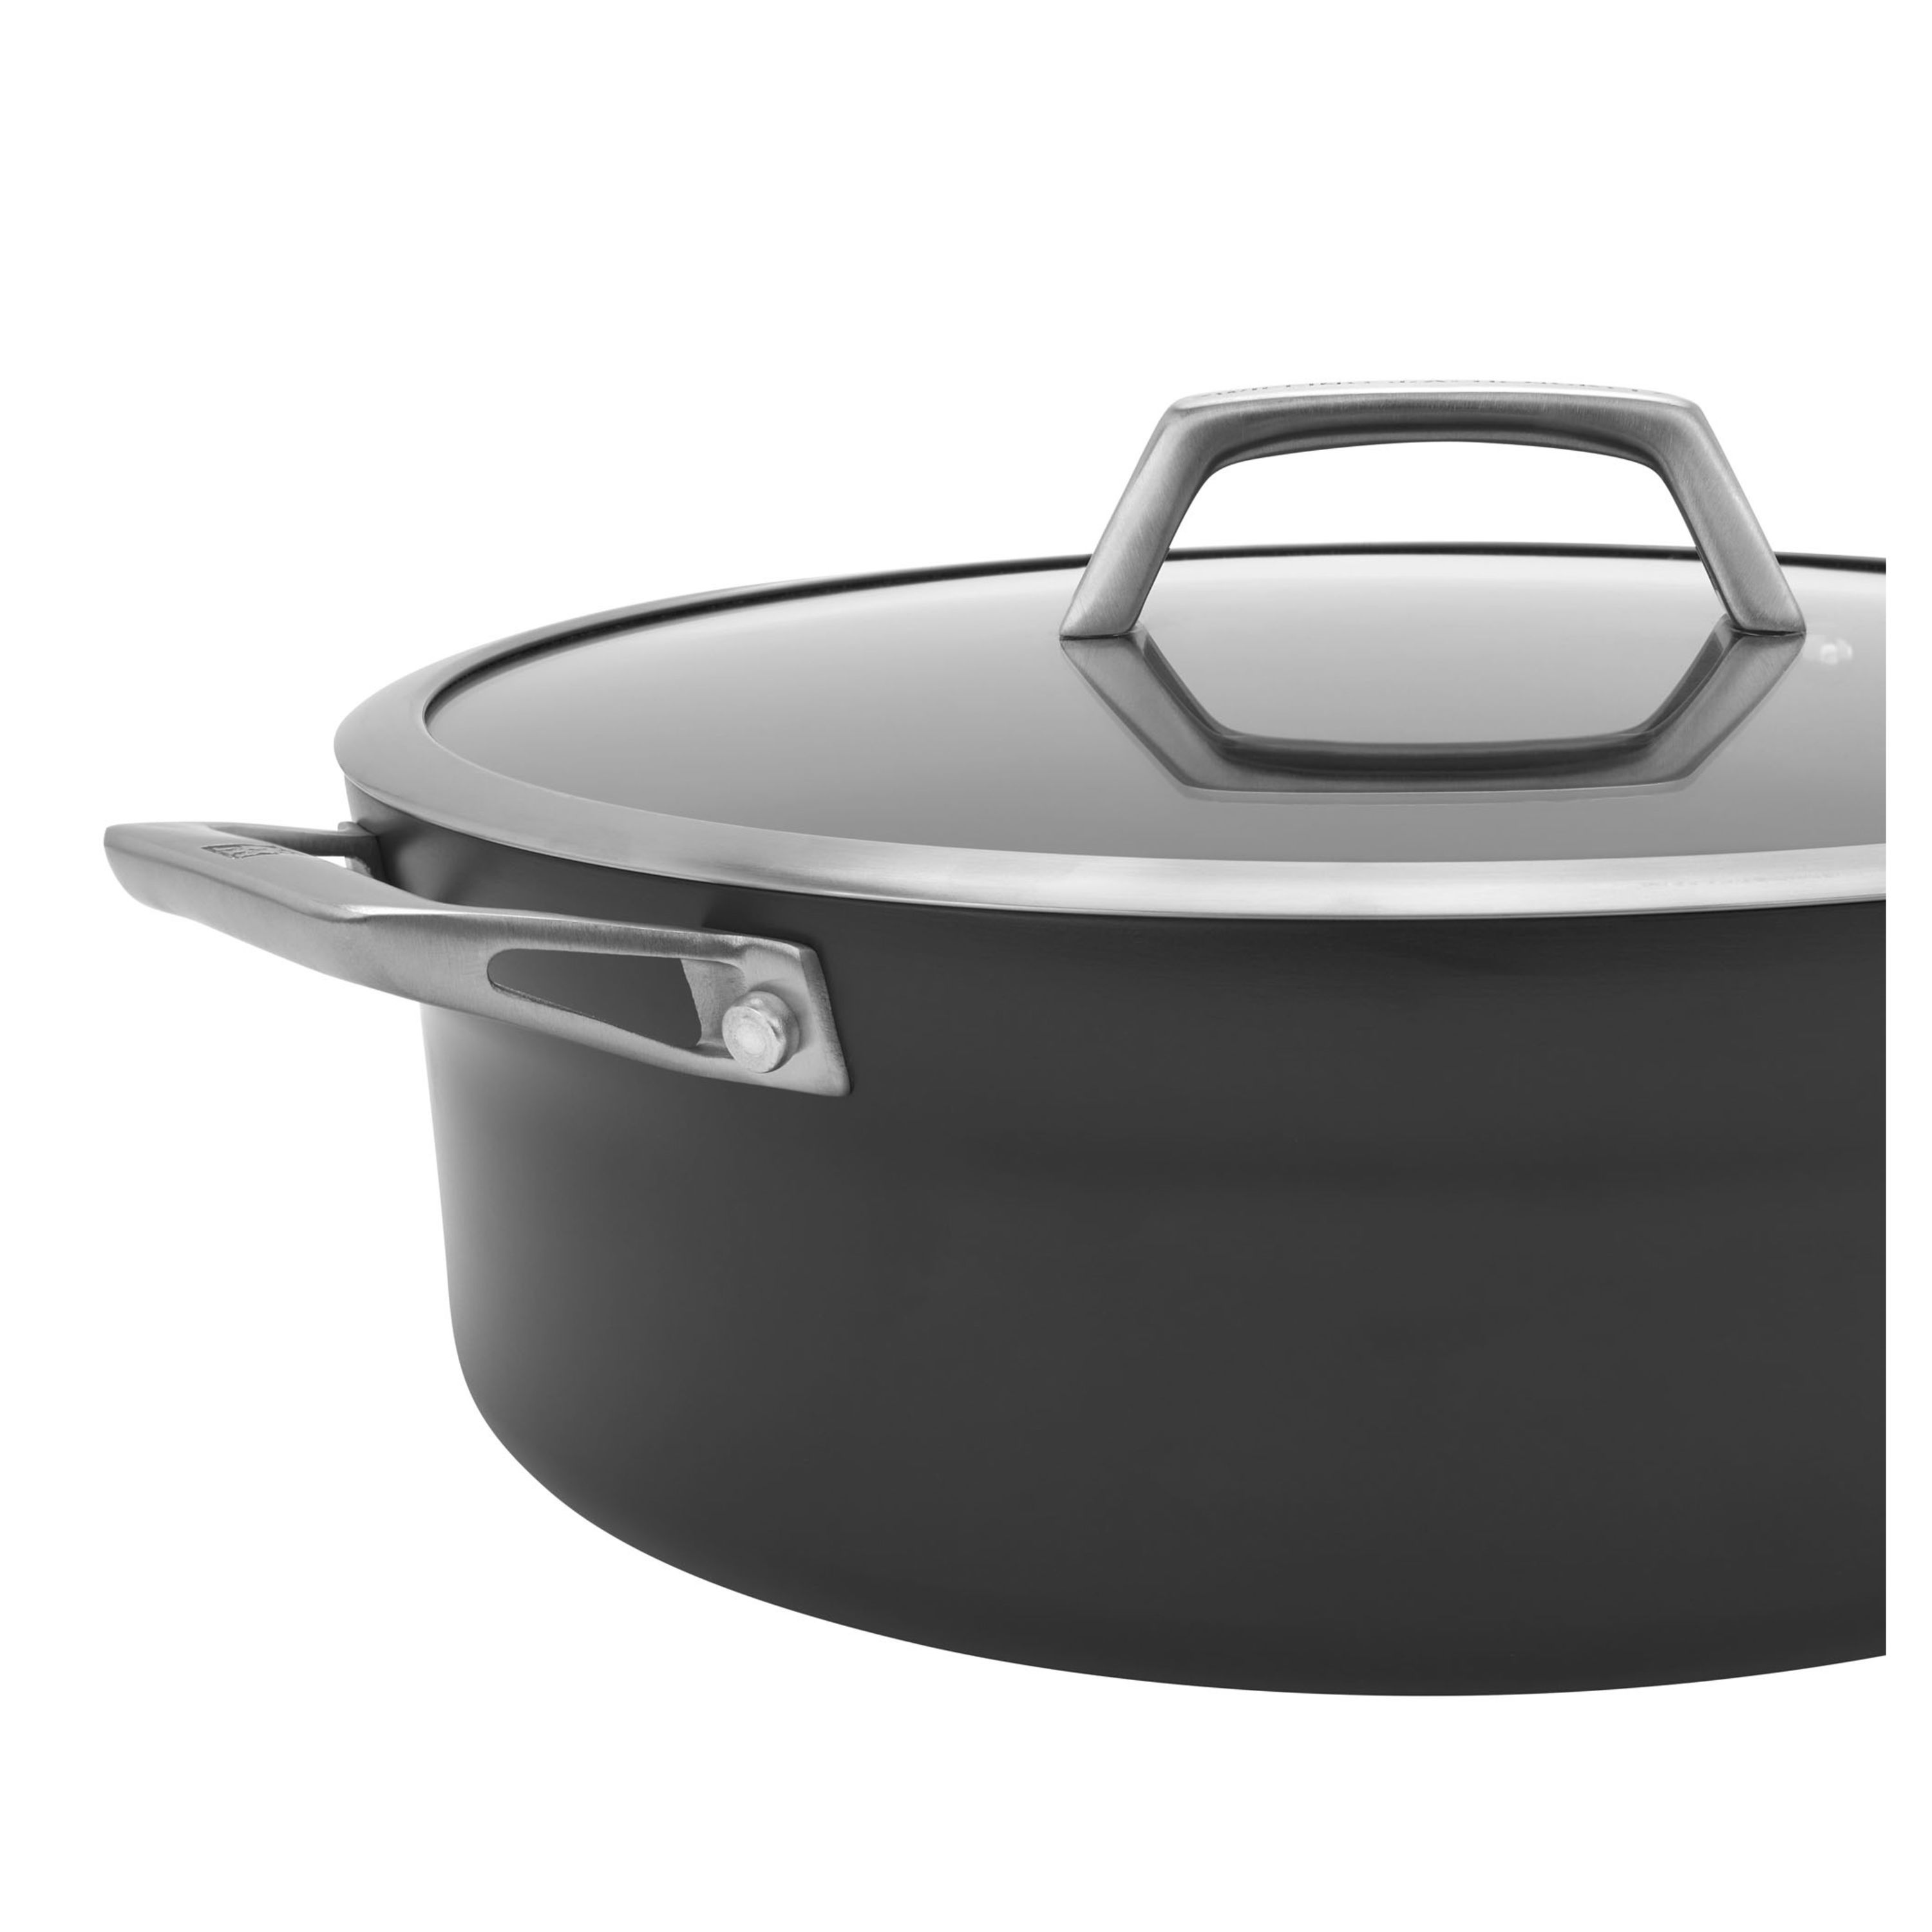 ZWILLING Motion Hard Anodized 8-inch Aluminum Nonstick Fry Pan, 8-inch -  Kroger